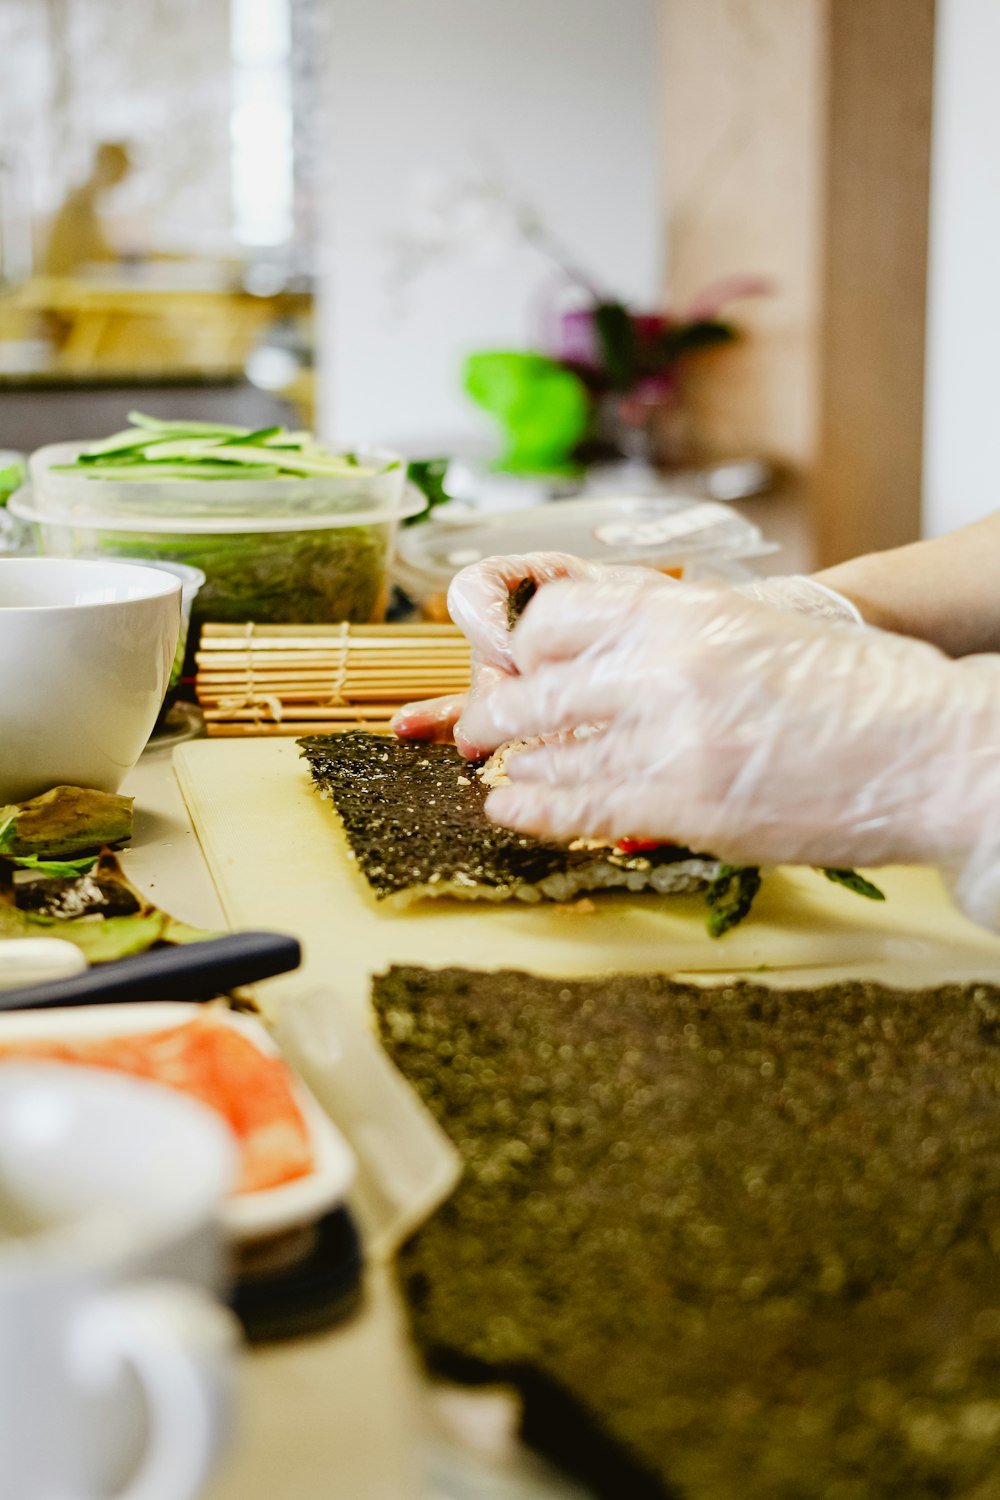 a person in white gloves is preparing food